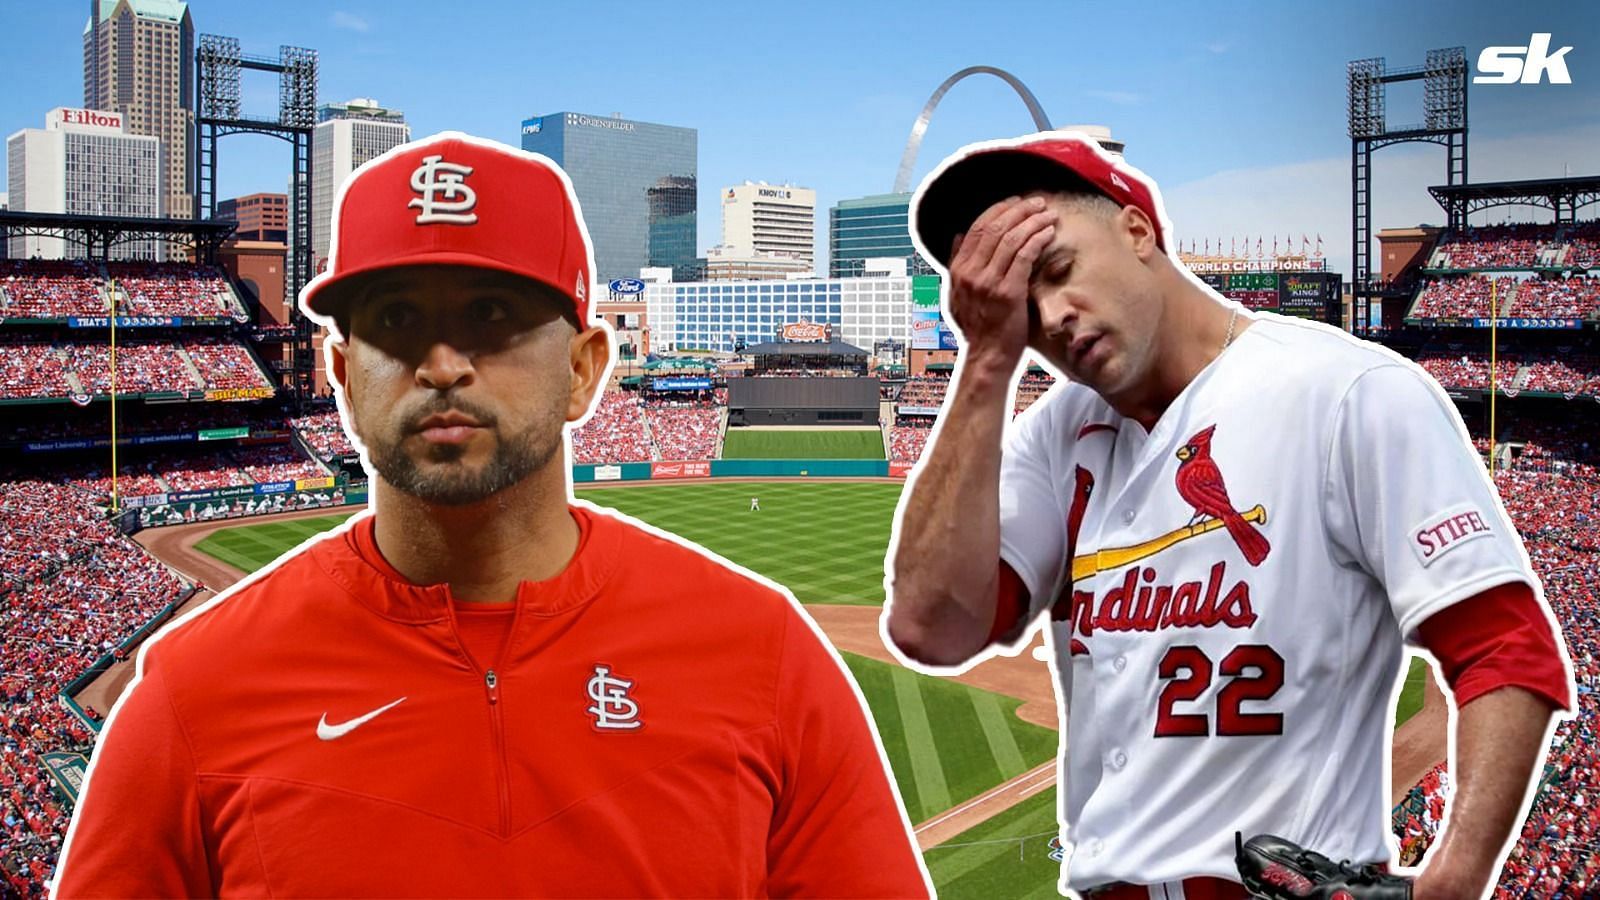 St. Louis Cardinals pitcher Jack Flaherty admits to trade rumors affecting  his play: I won't lie, I was a little bit distracted